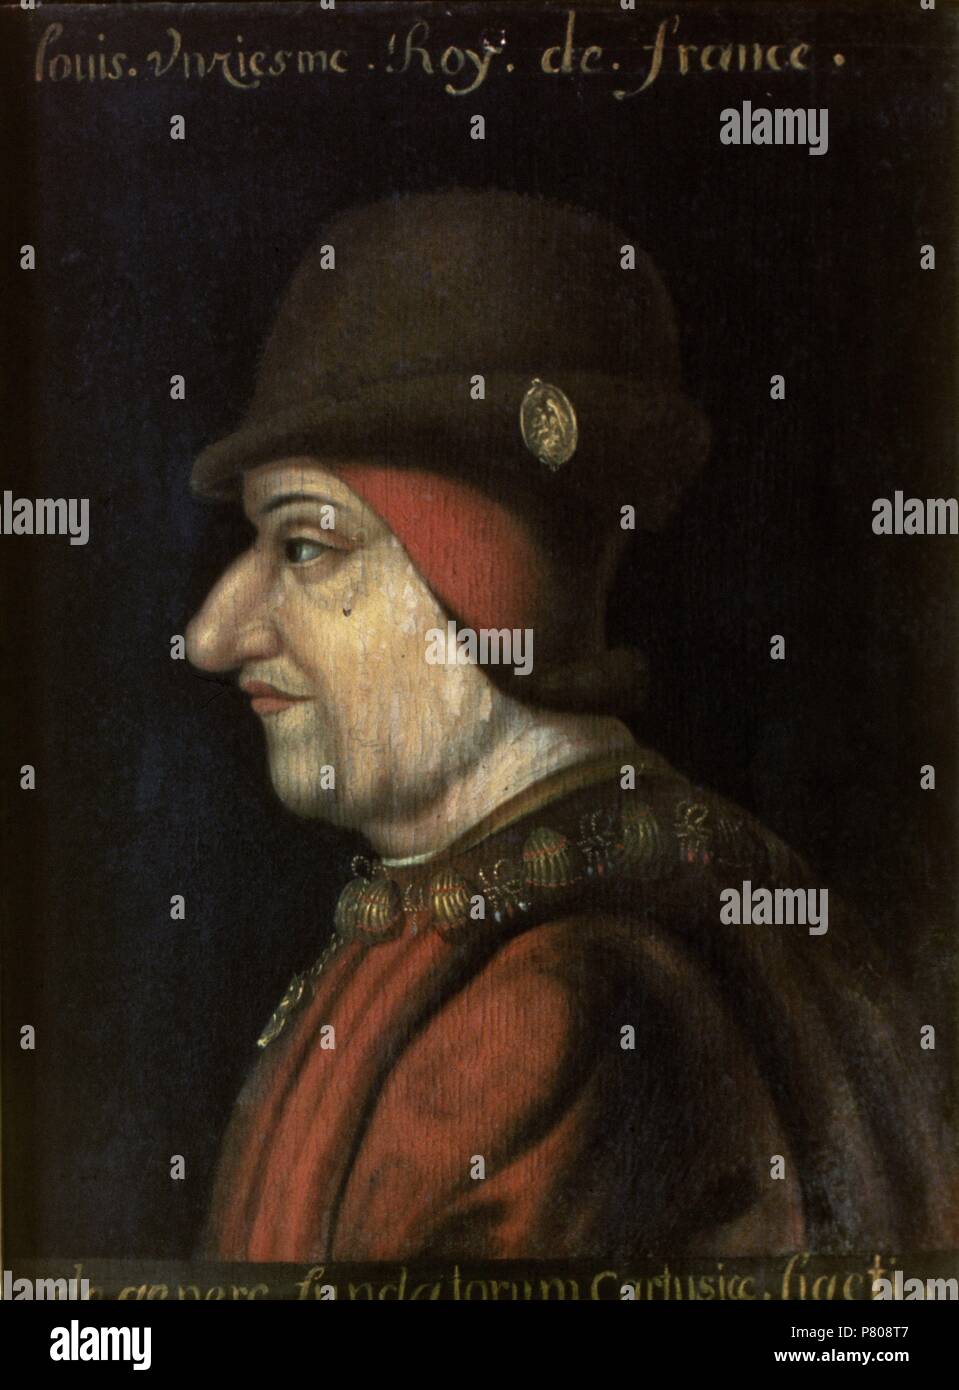 Louis XI of France (1423-1483), The Prudent. House of Valois. Portrait. Anonymous author. Stock Photo